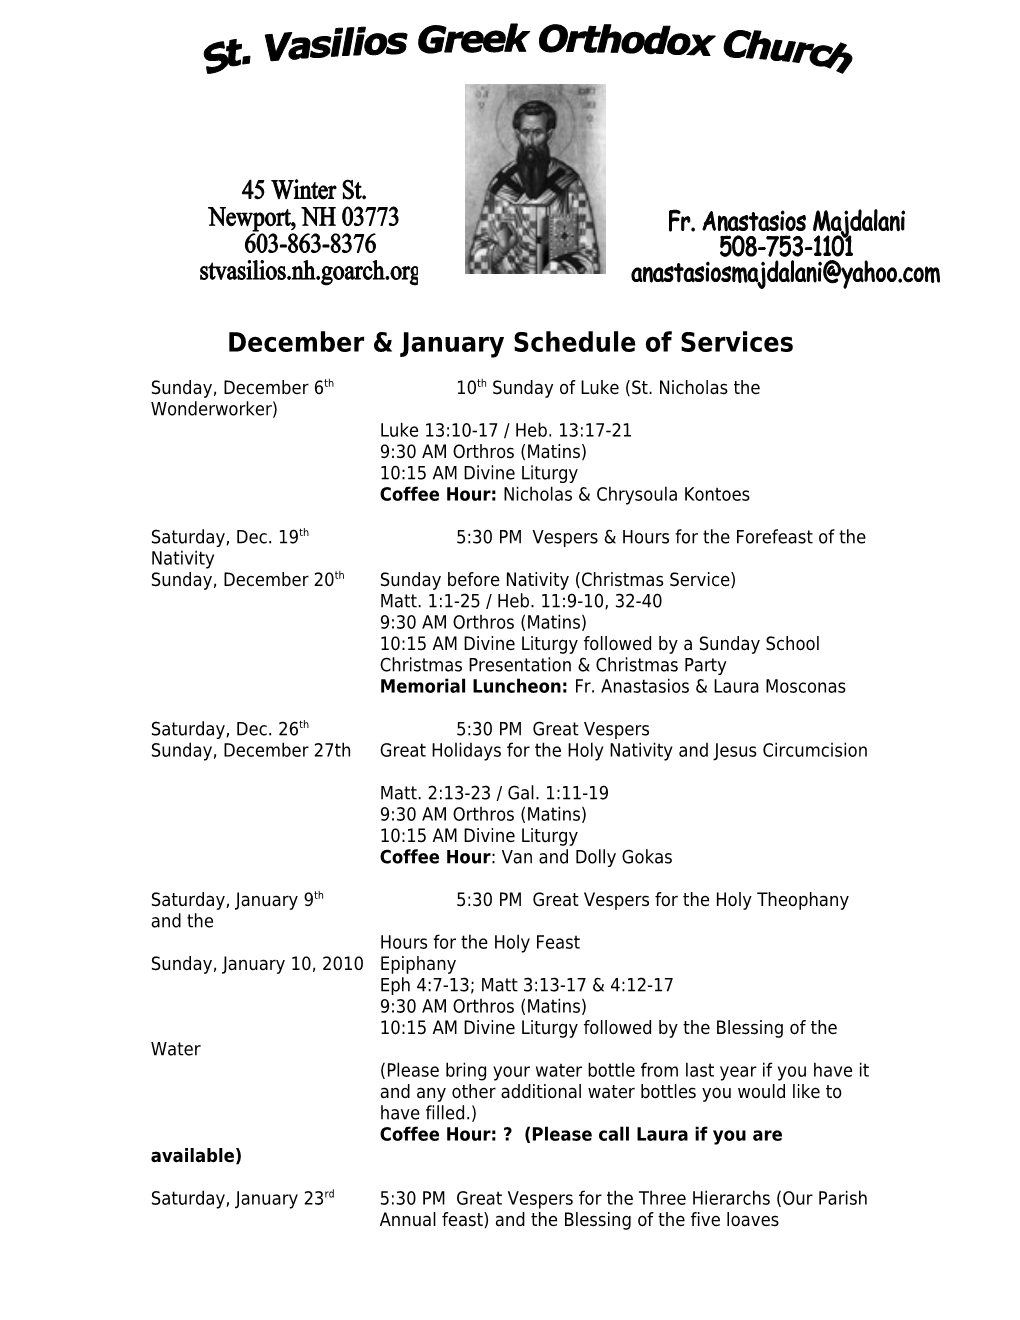 December & January Schedule of Services